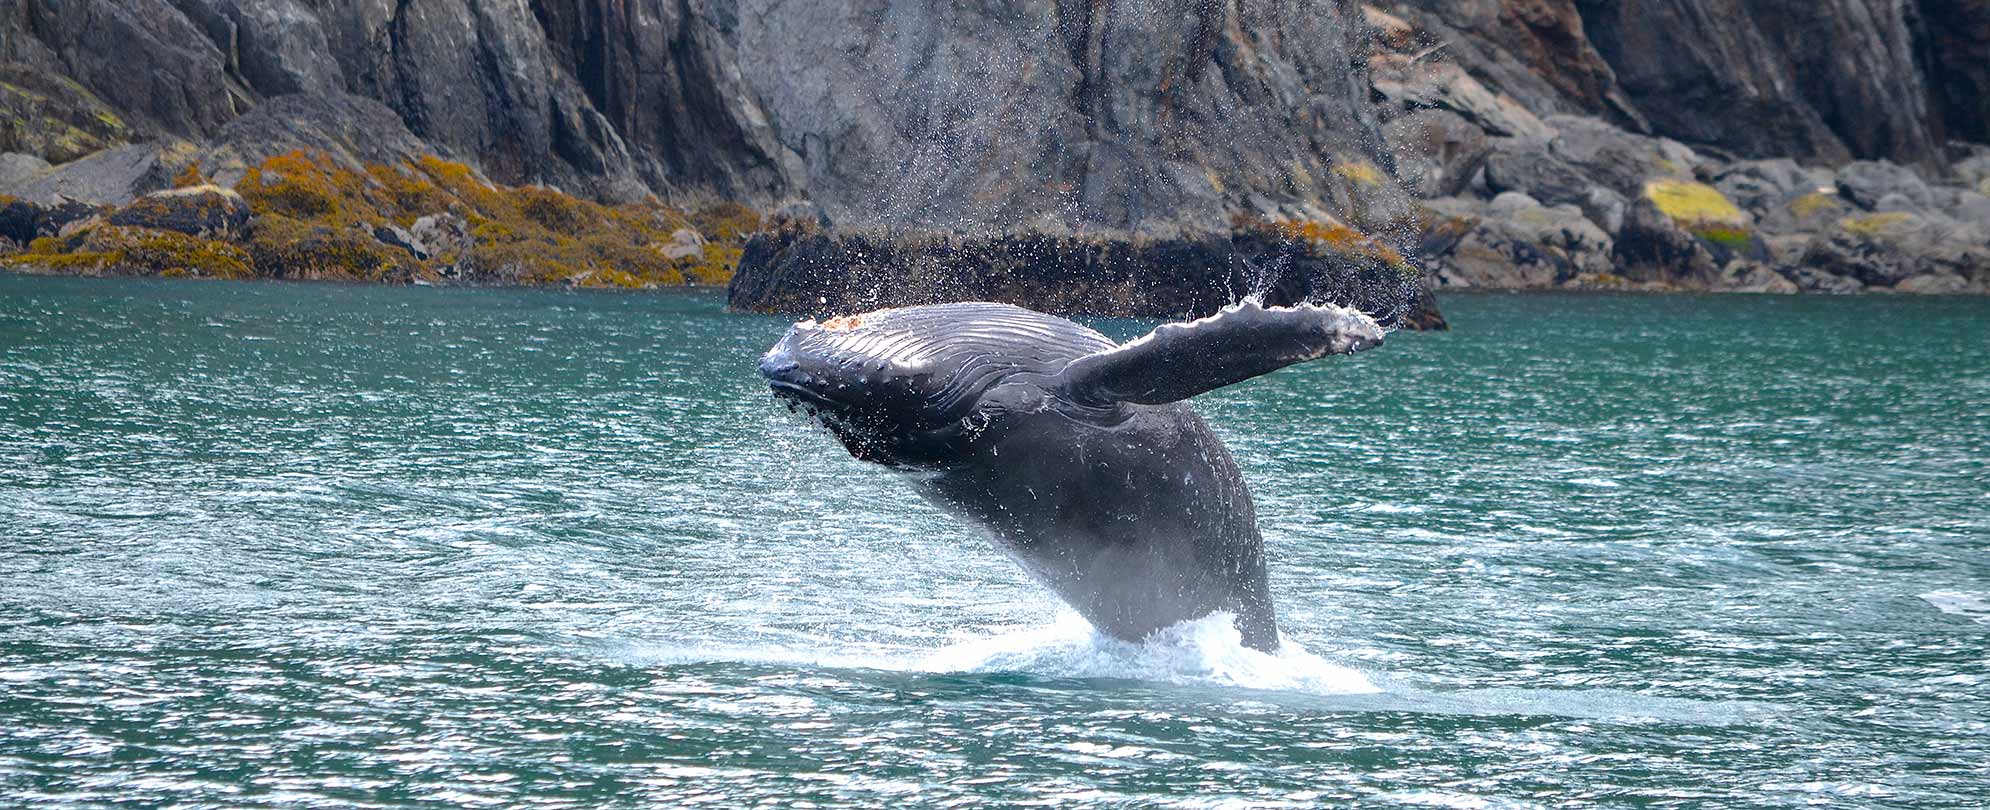 A humpback whale flipping out of the water in Alaska.